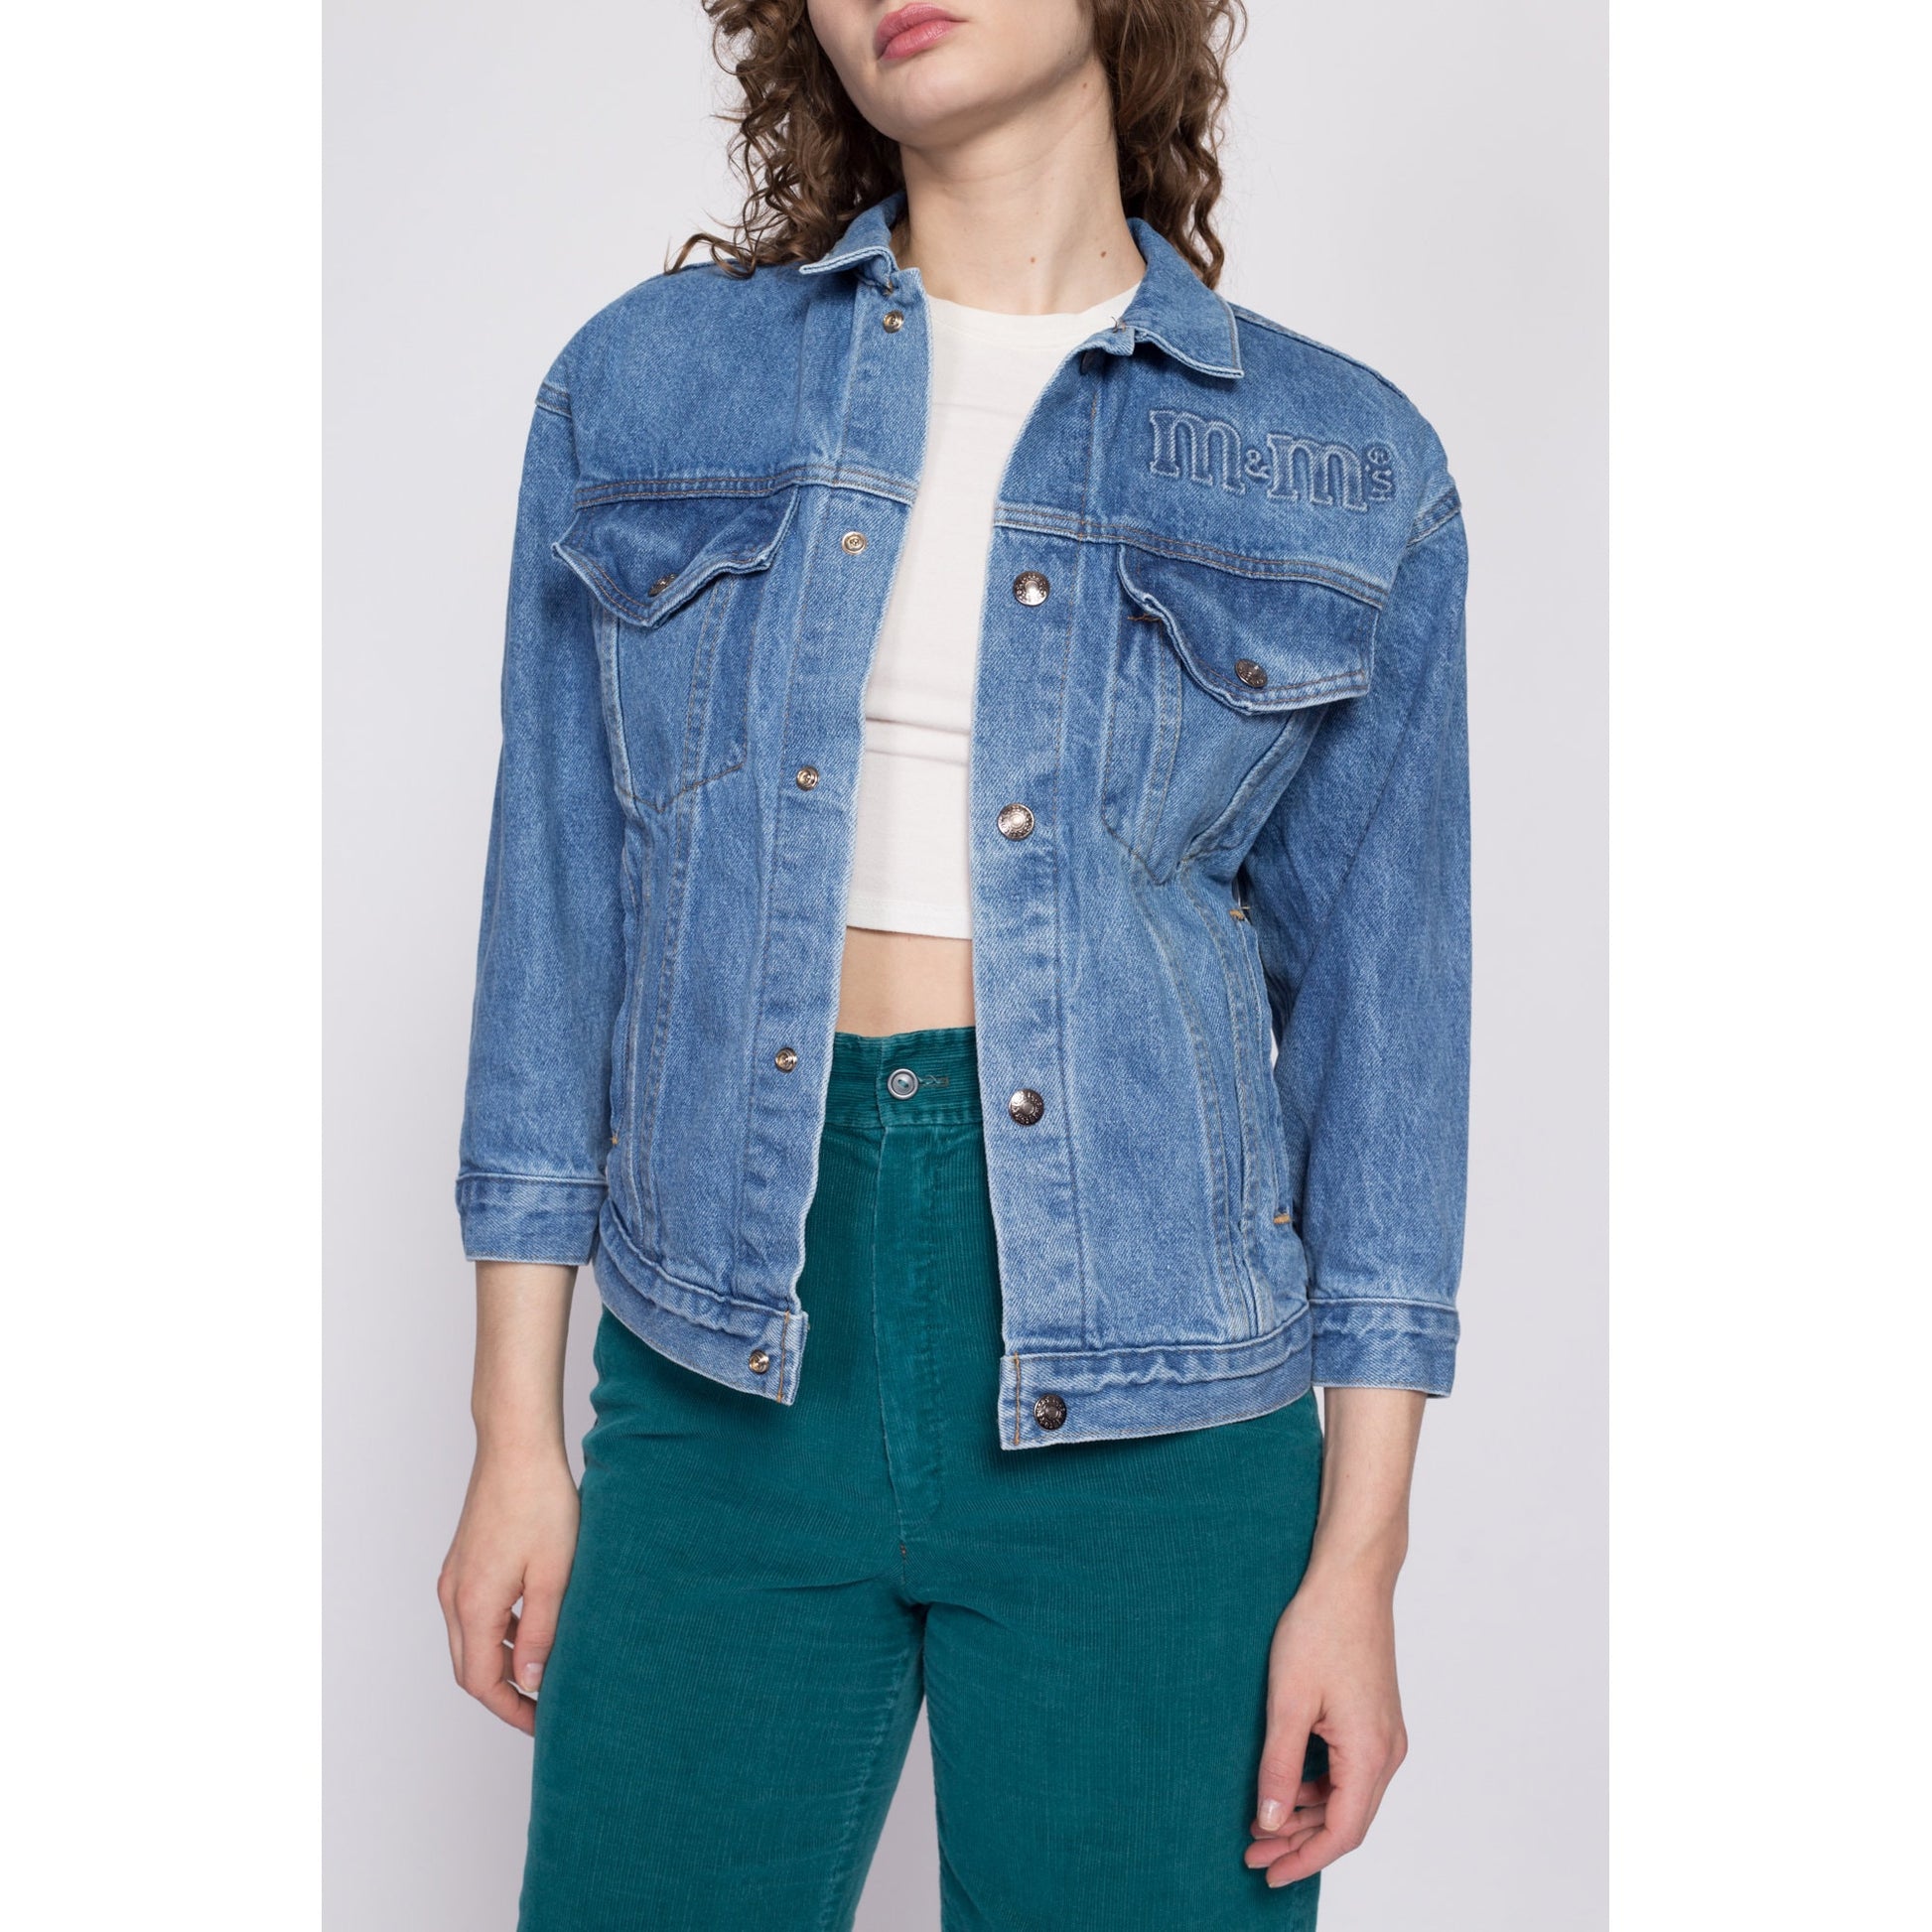 Girls Jeans, Top With Jacket at Rs 595/piece